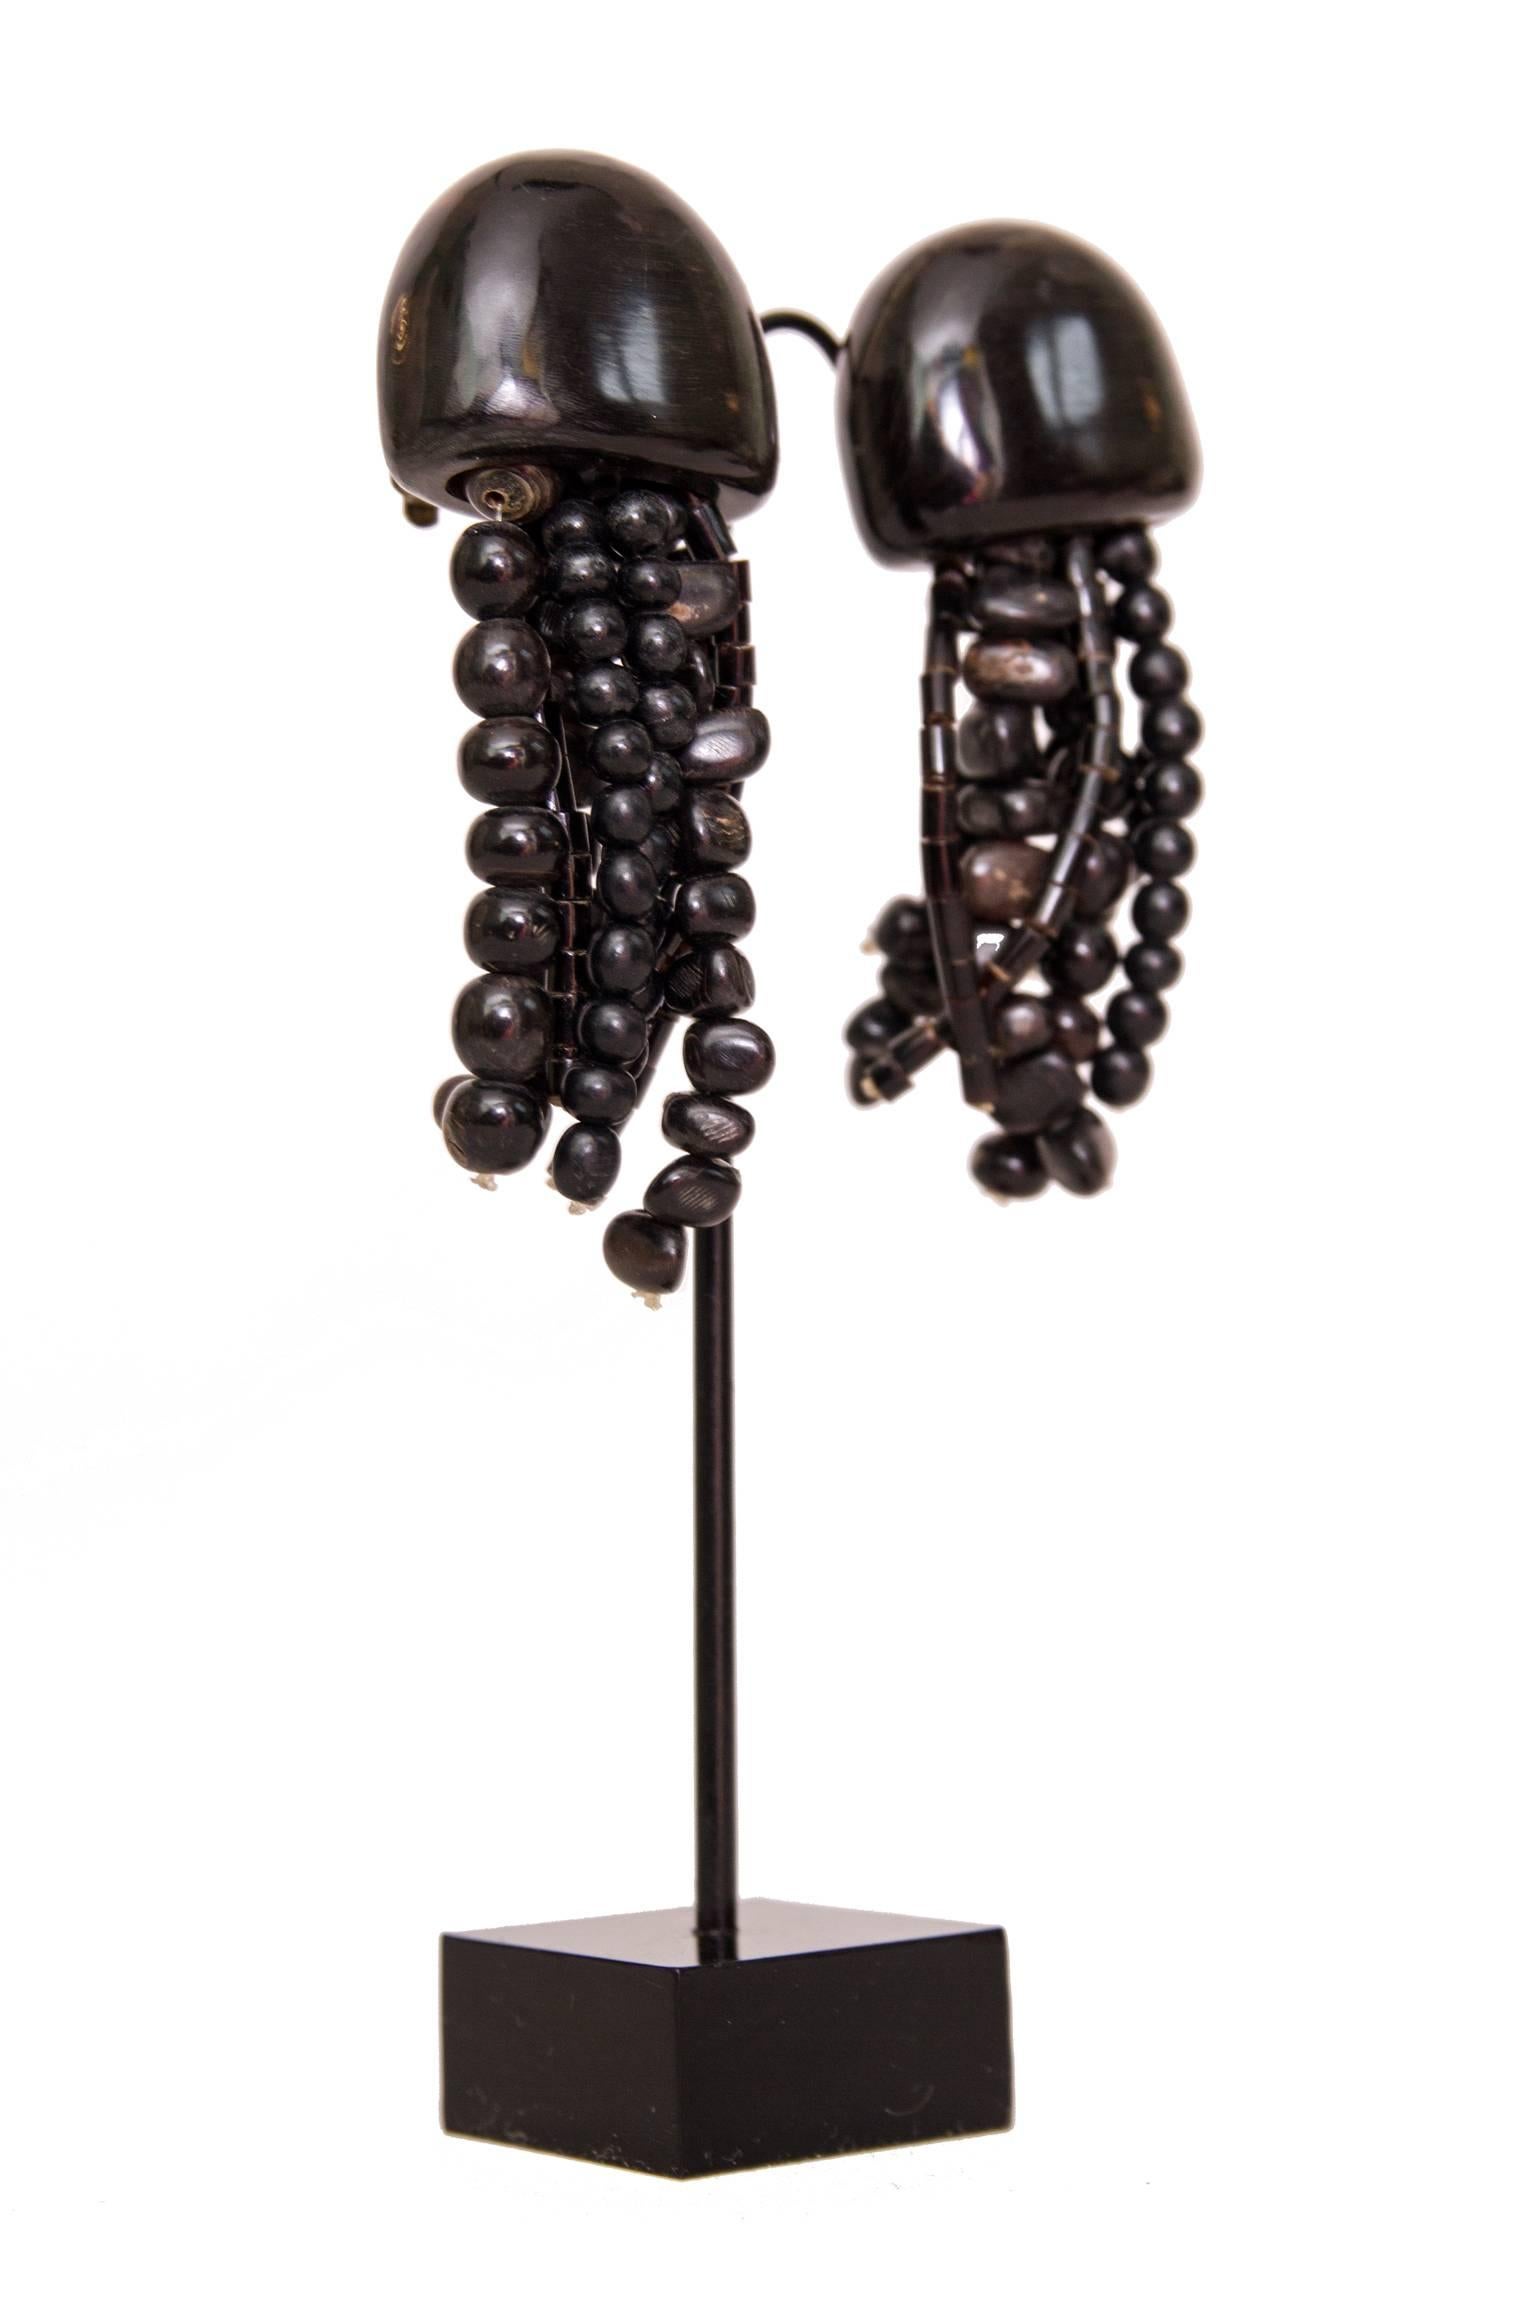 A pair of 1980s bone and wood Monies dangle clip-on earrings with multi-stranded wooden beads of varying shapes and sizes.